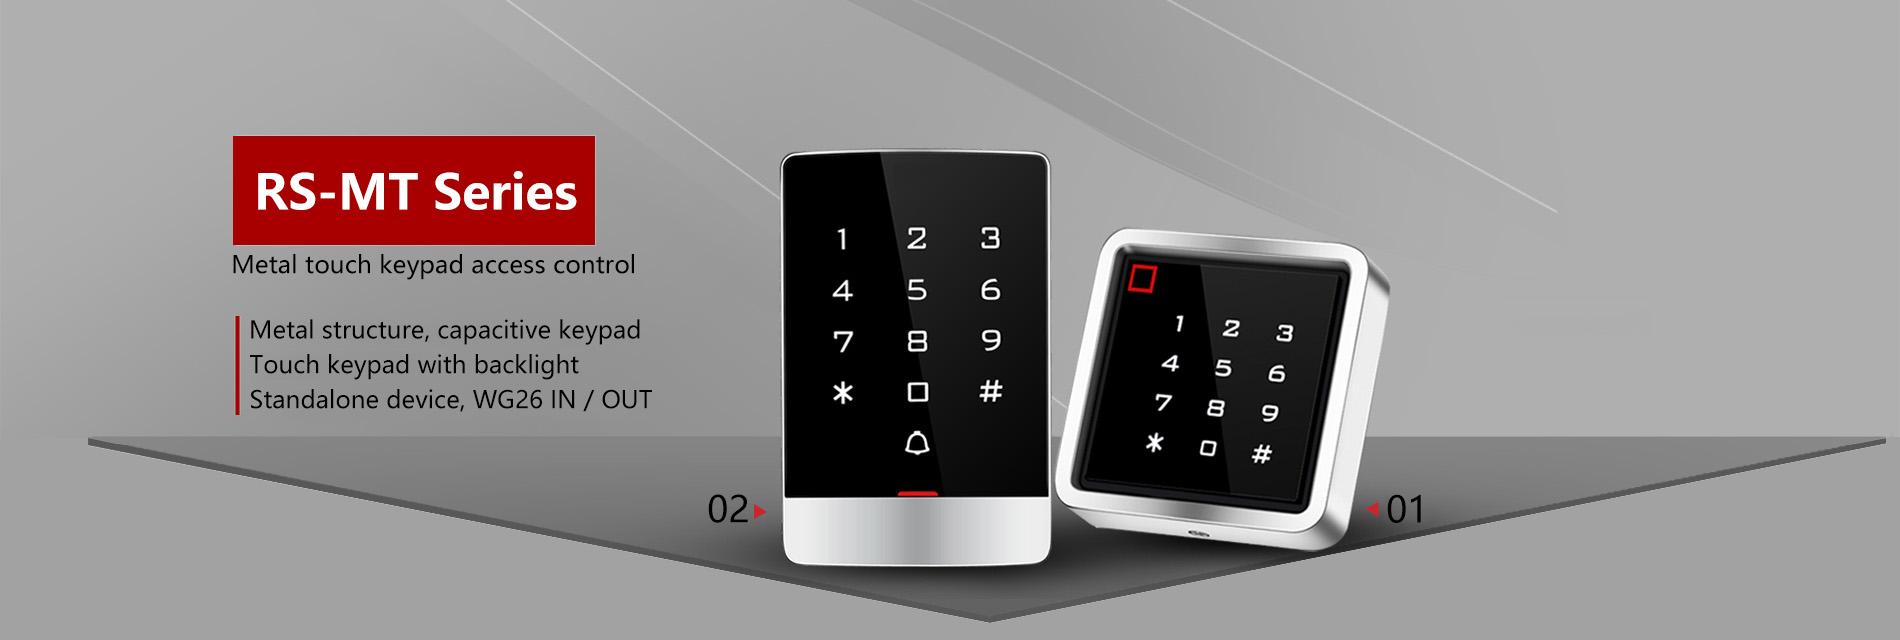 Metal touch access control